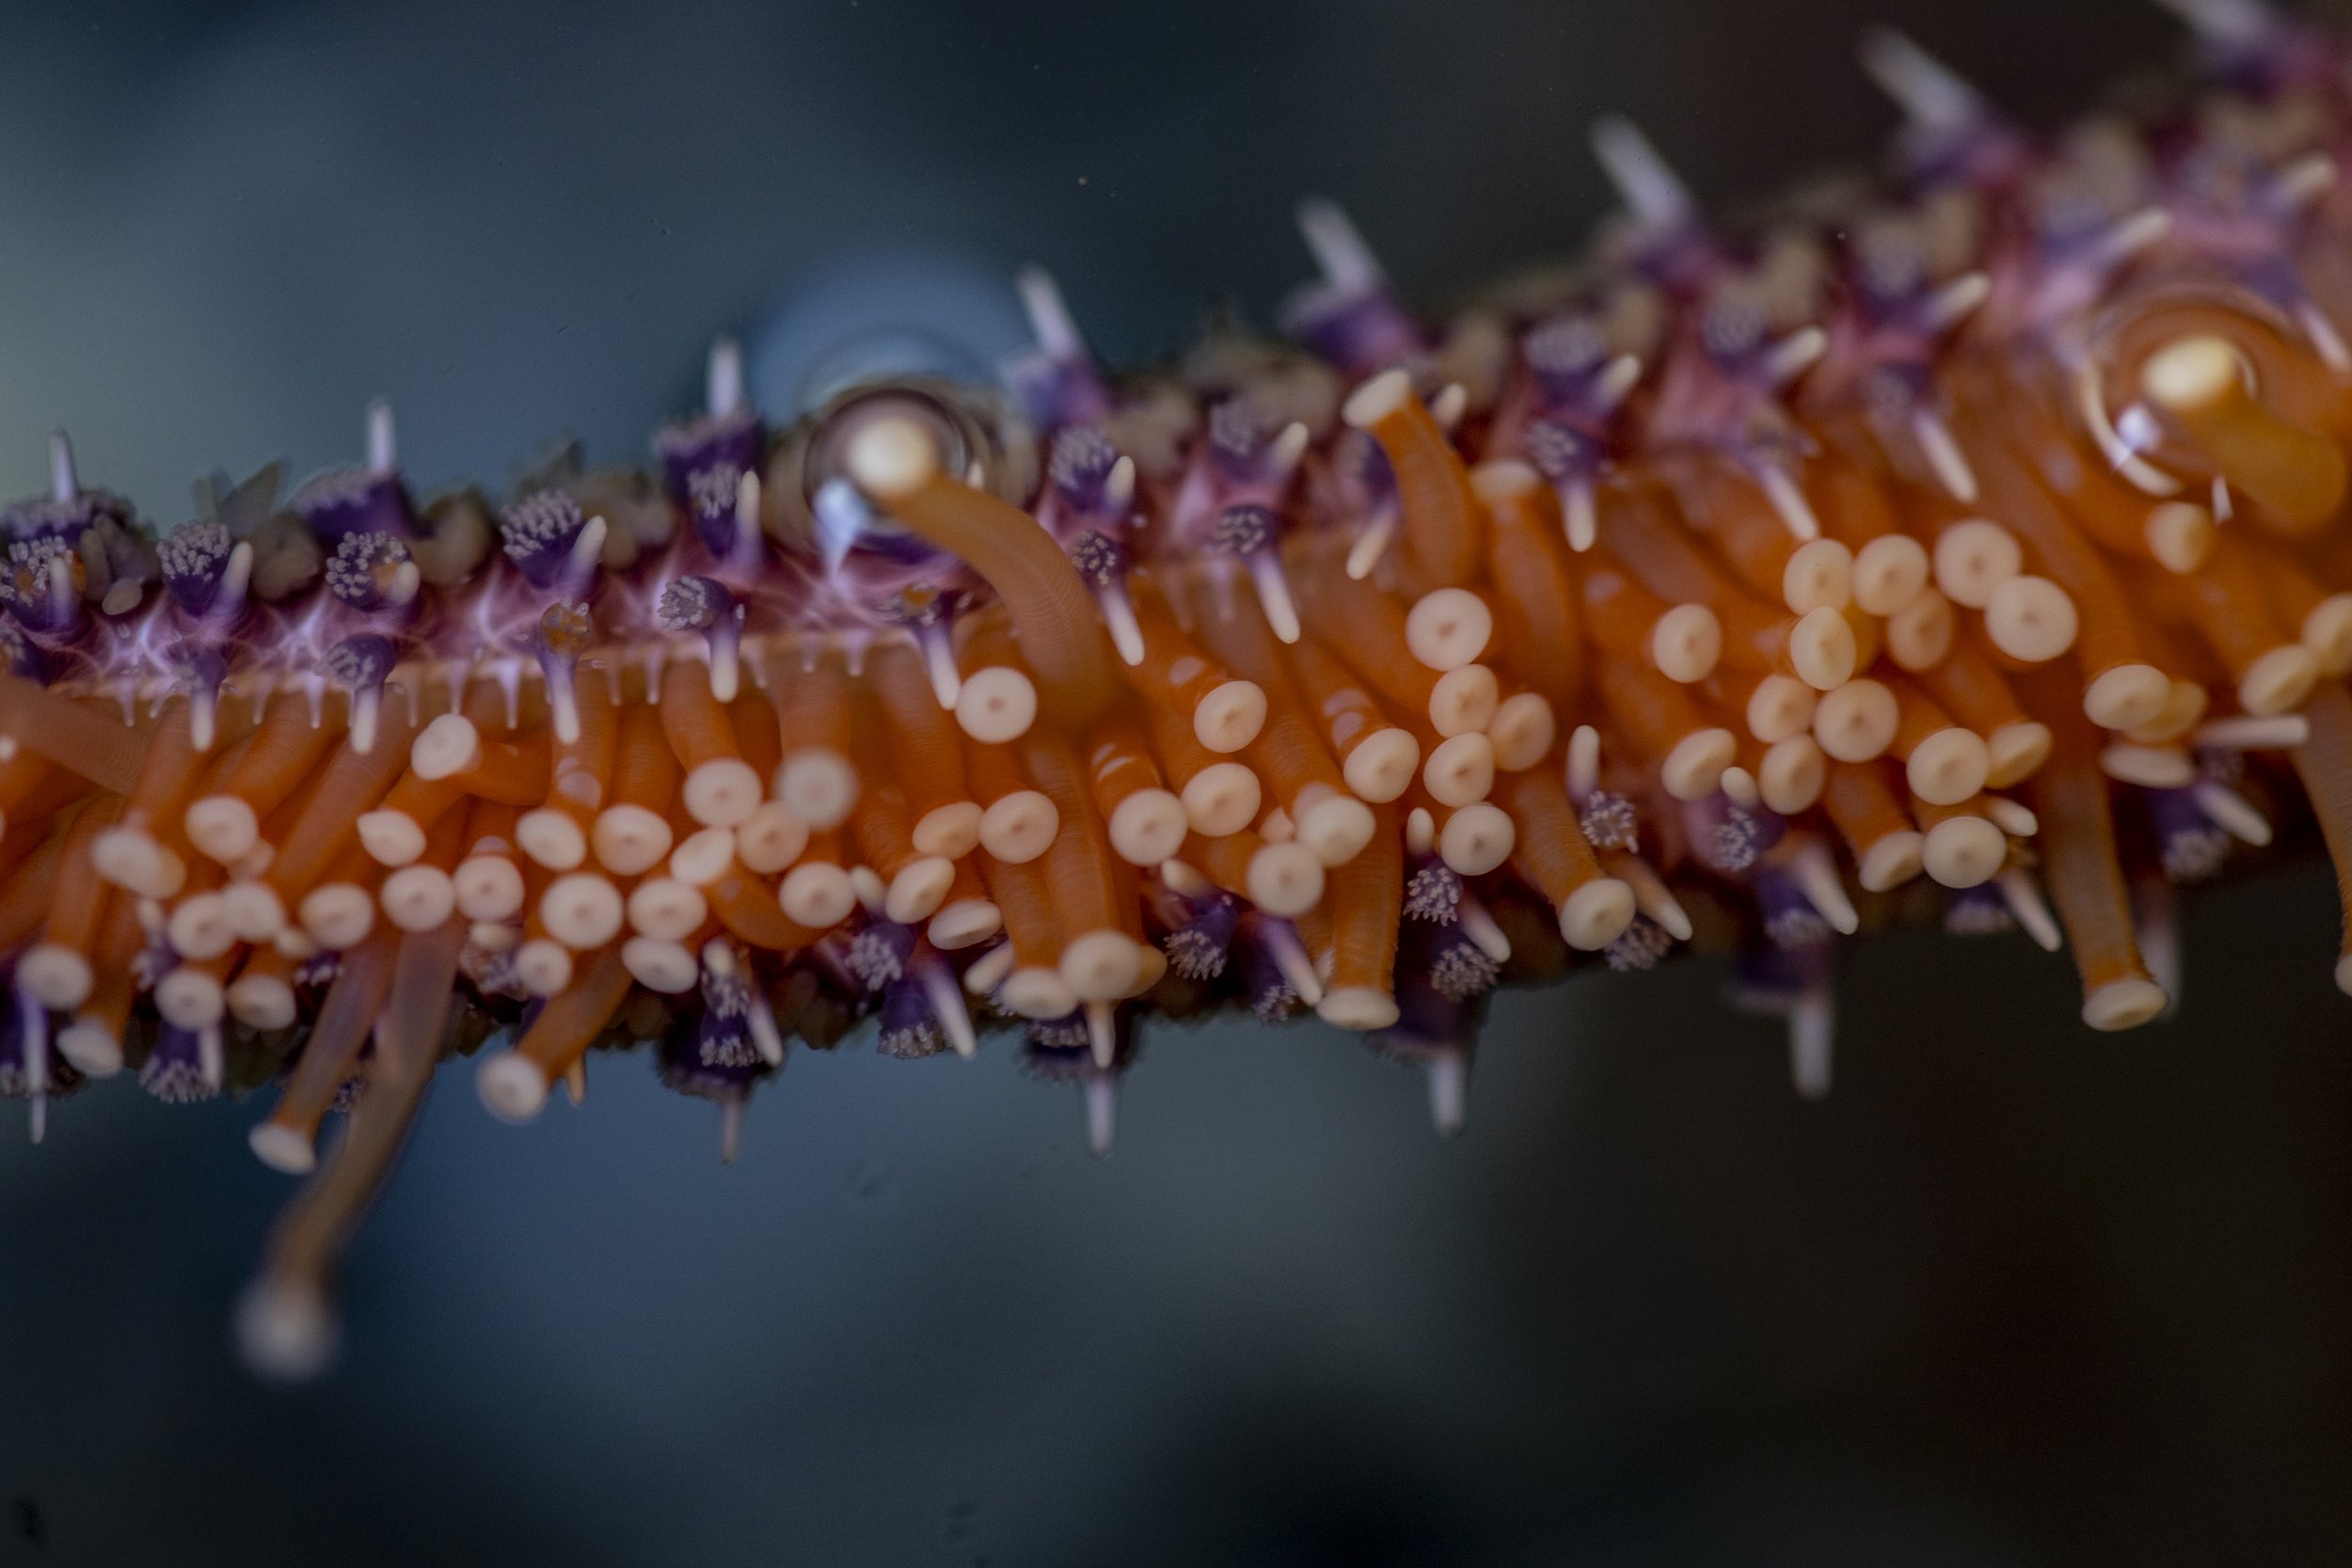   An arm of an adult sunflower sea star, with its numerous, orange and white tube feet that it uses for walking, breathing and sensing. The species has been largely decimated along the West Coast because of a sea star wasting disease. The sunflower s